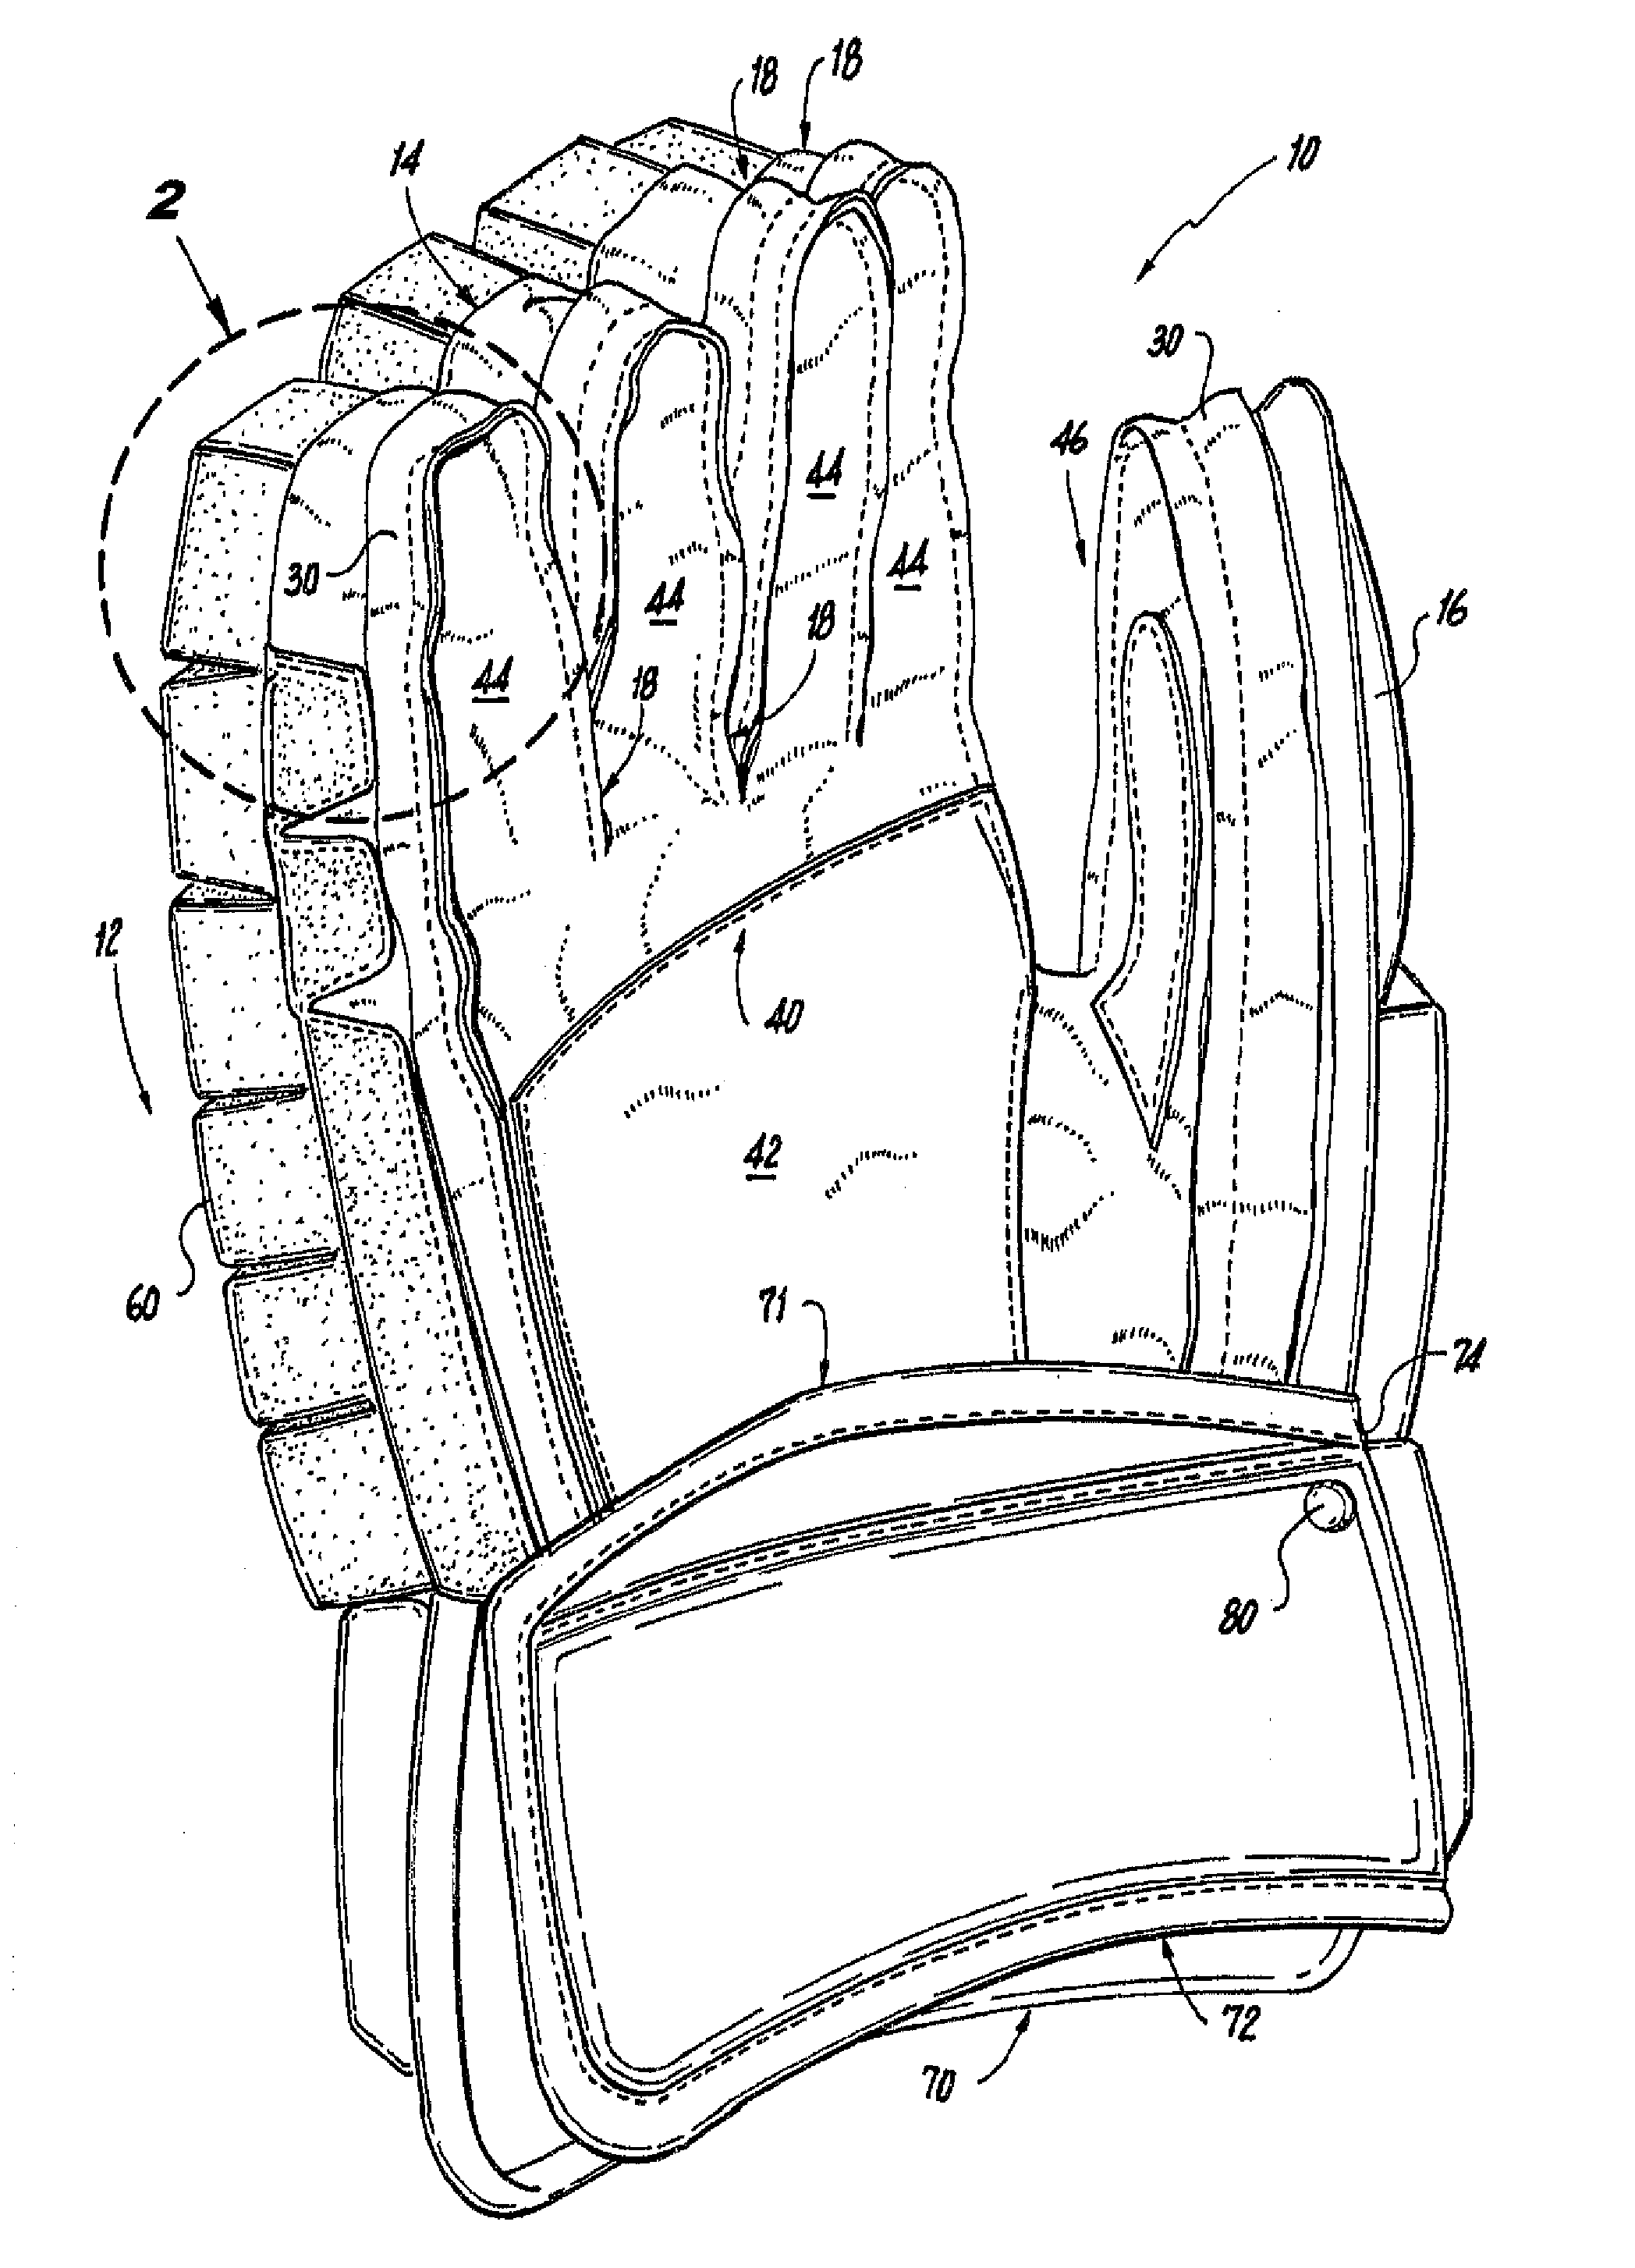 Zipper attached sports glove with fly cover protection